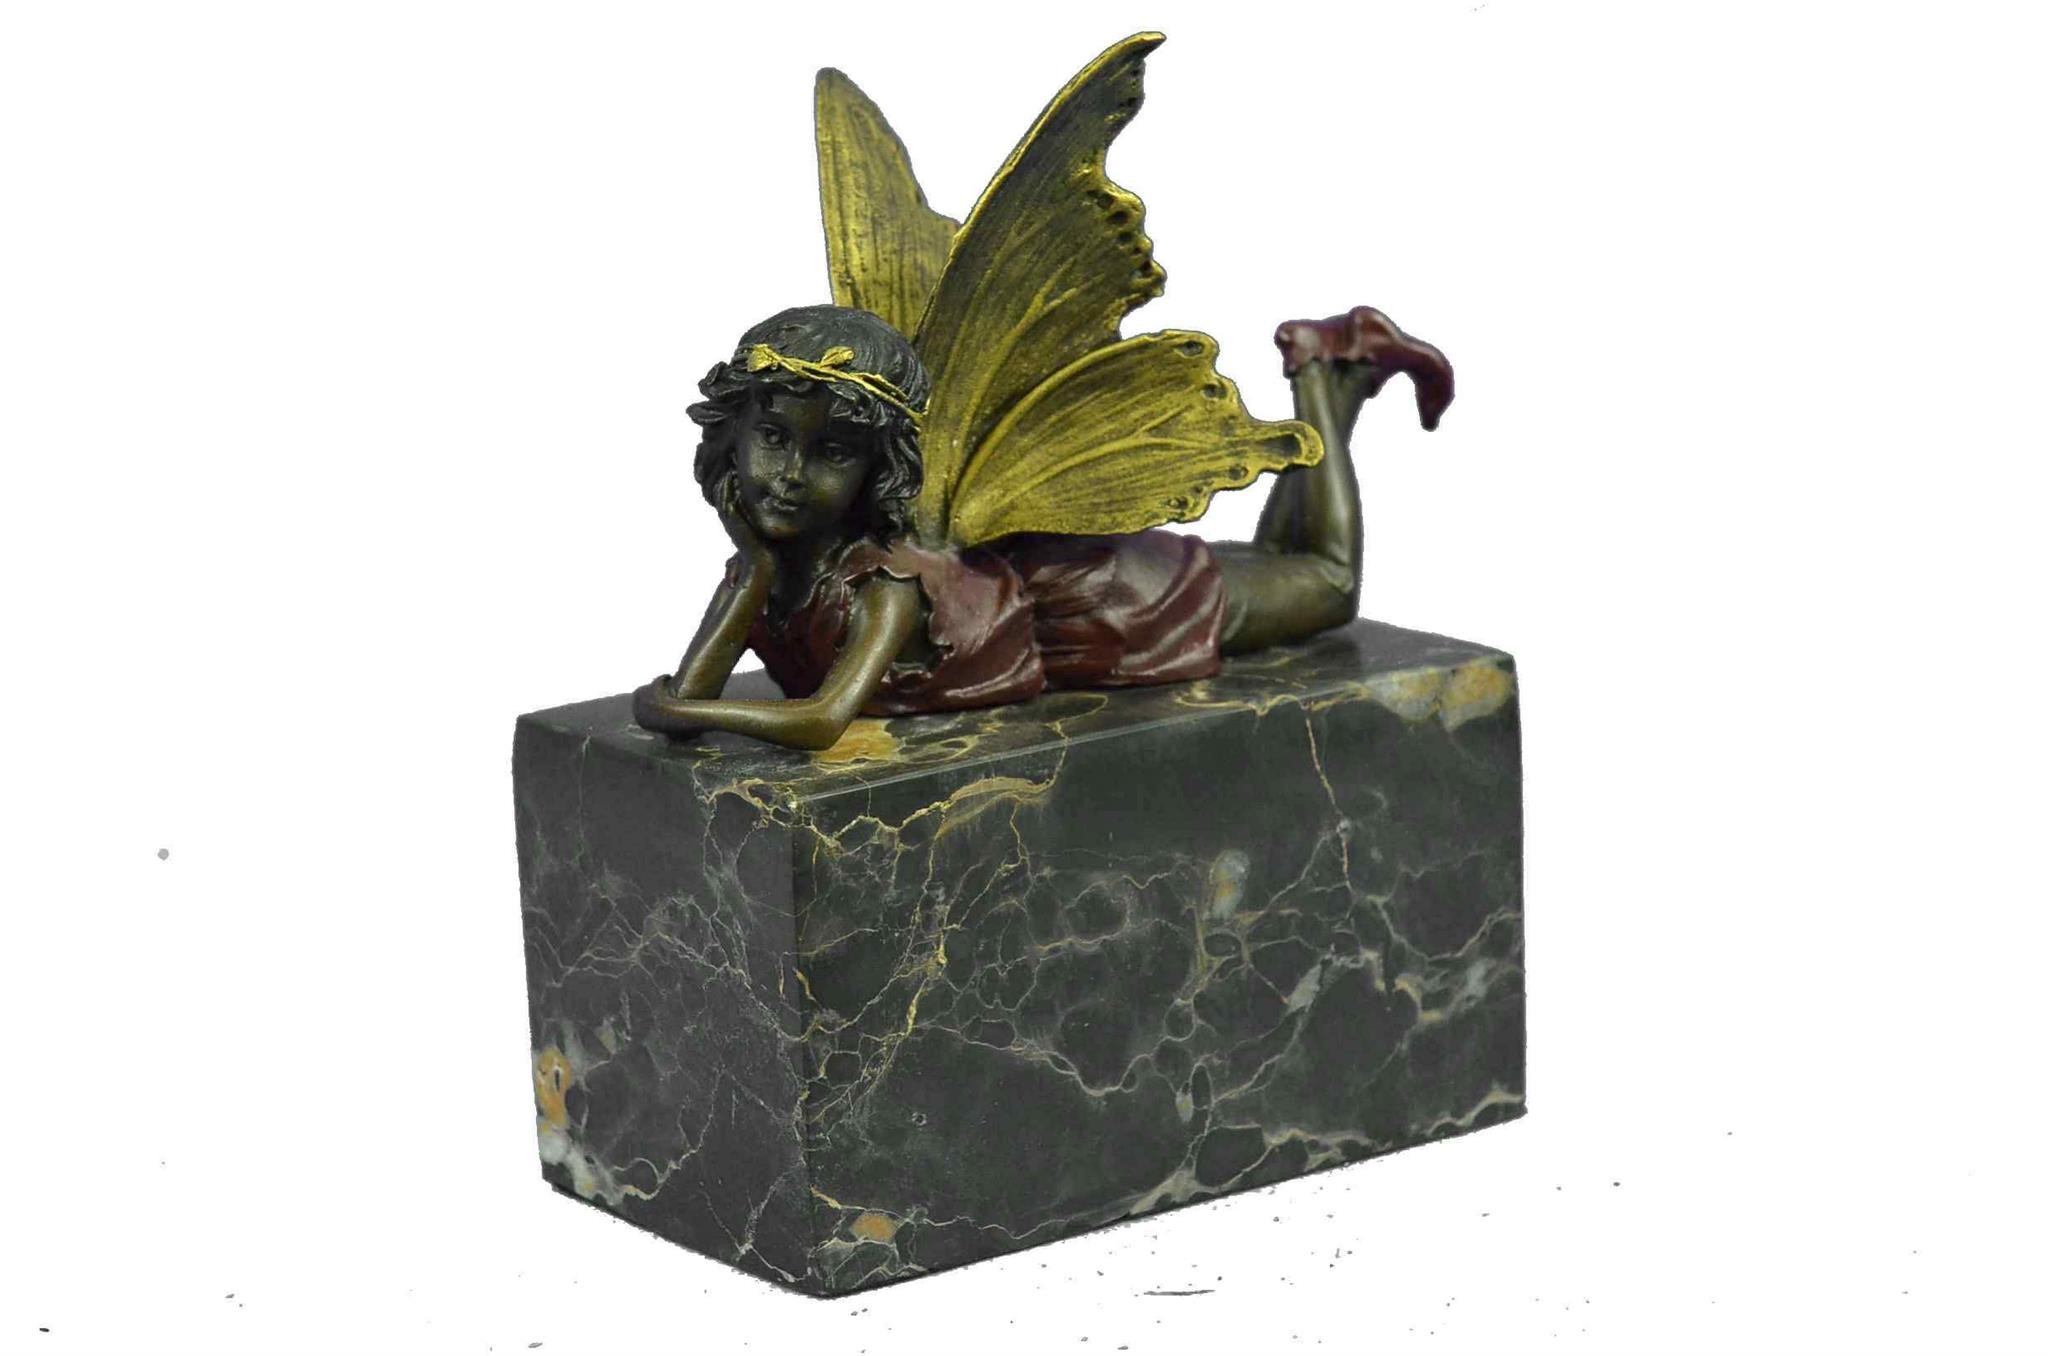 $150 or less Bronzes and Collectibles- In time for Christmas